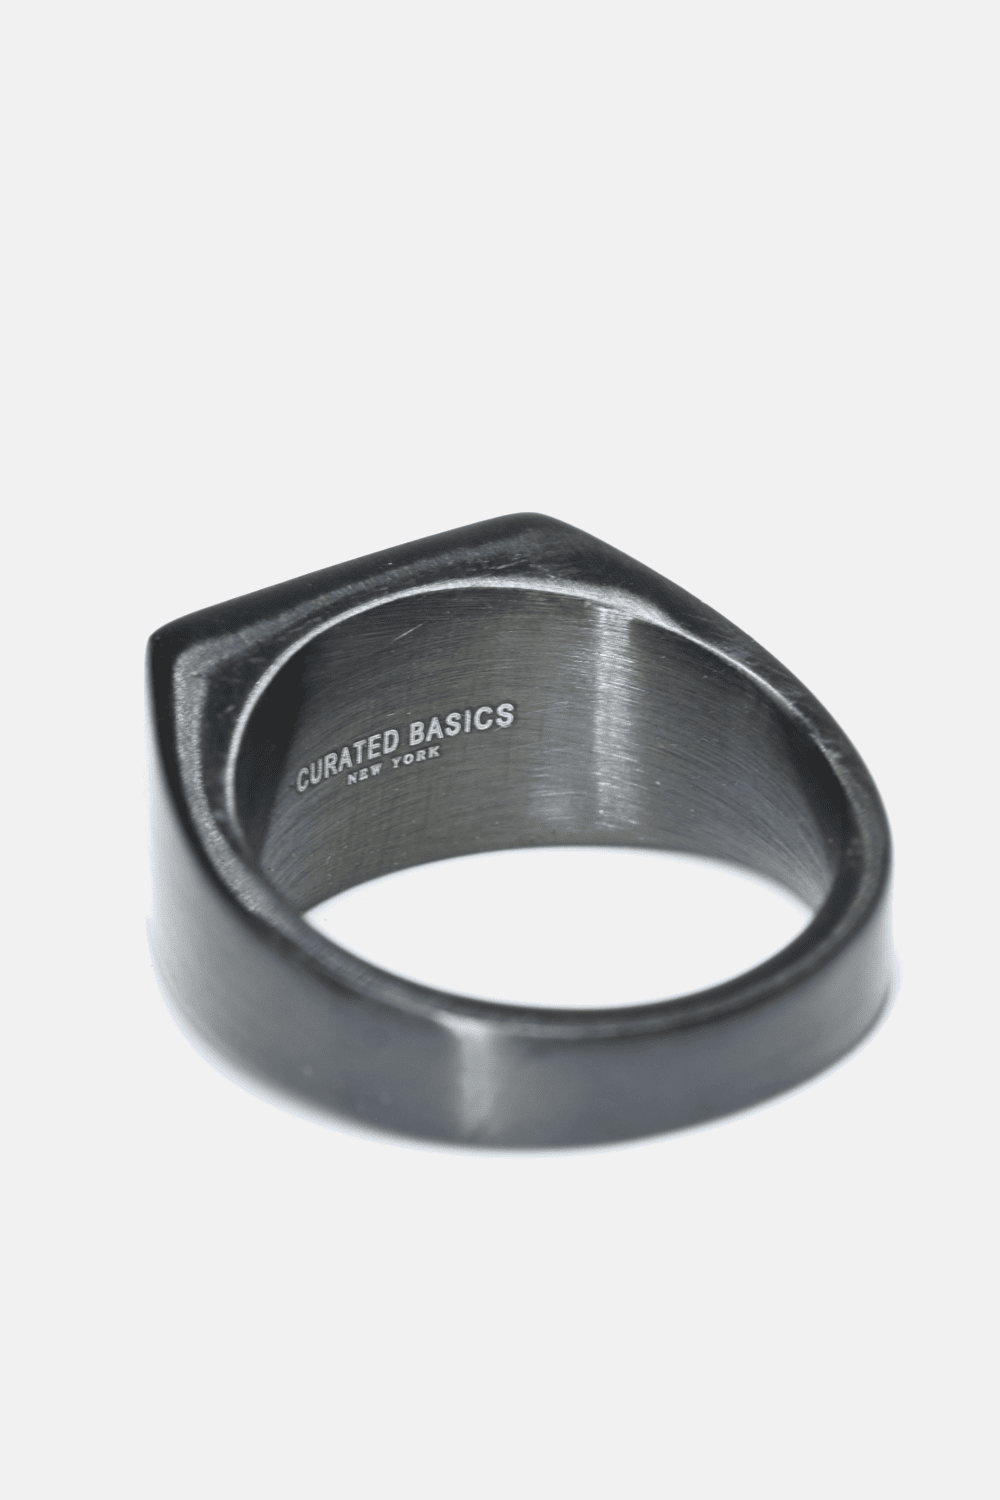 Curated Basics - Flat Top Ring Rings